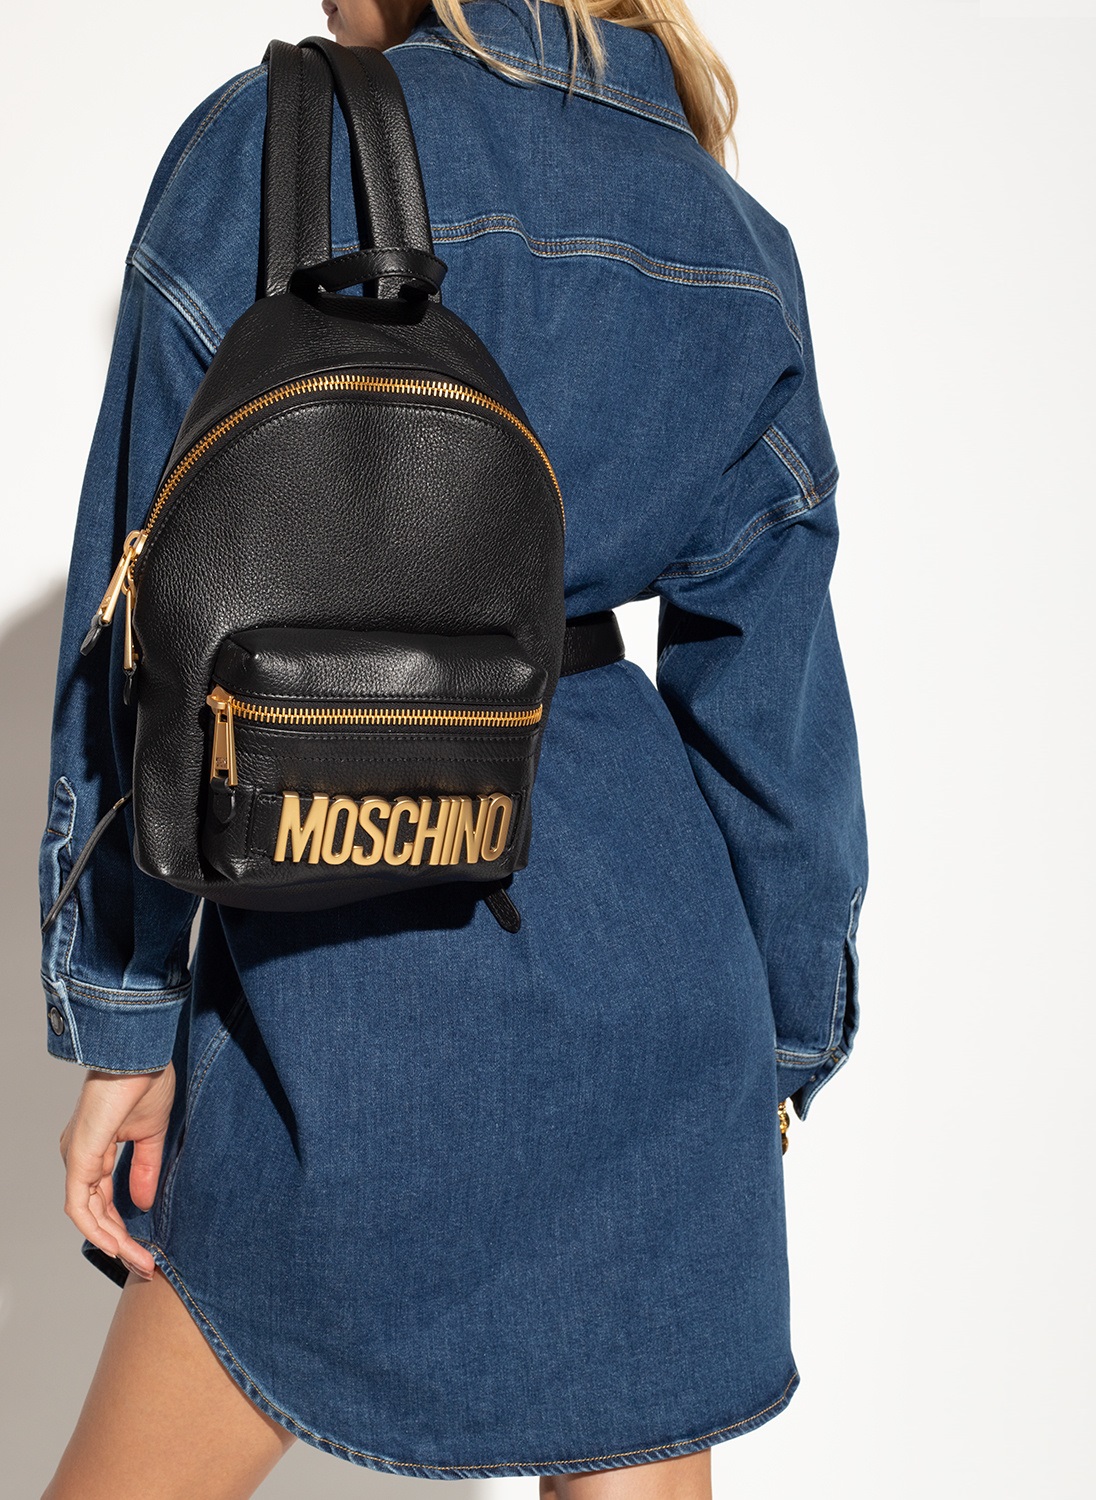 BALO NỮ MÀU ĐEN MOSCHINO BLACK LEATHER BACKPACK WITH LOGO 3